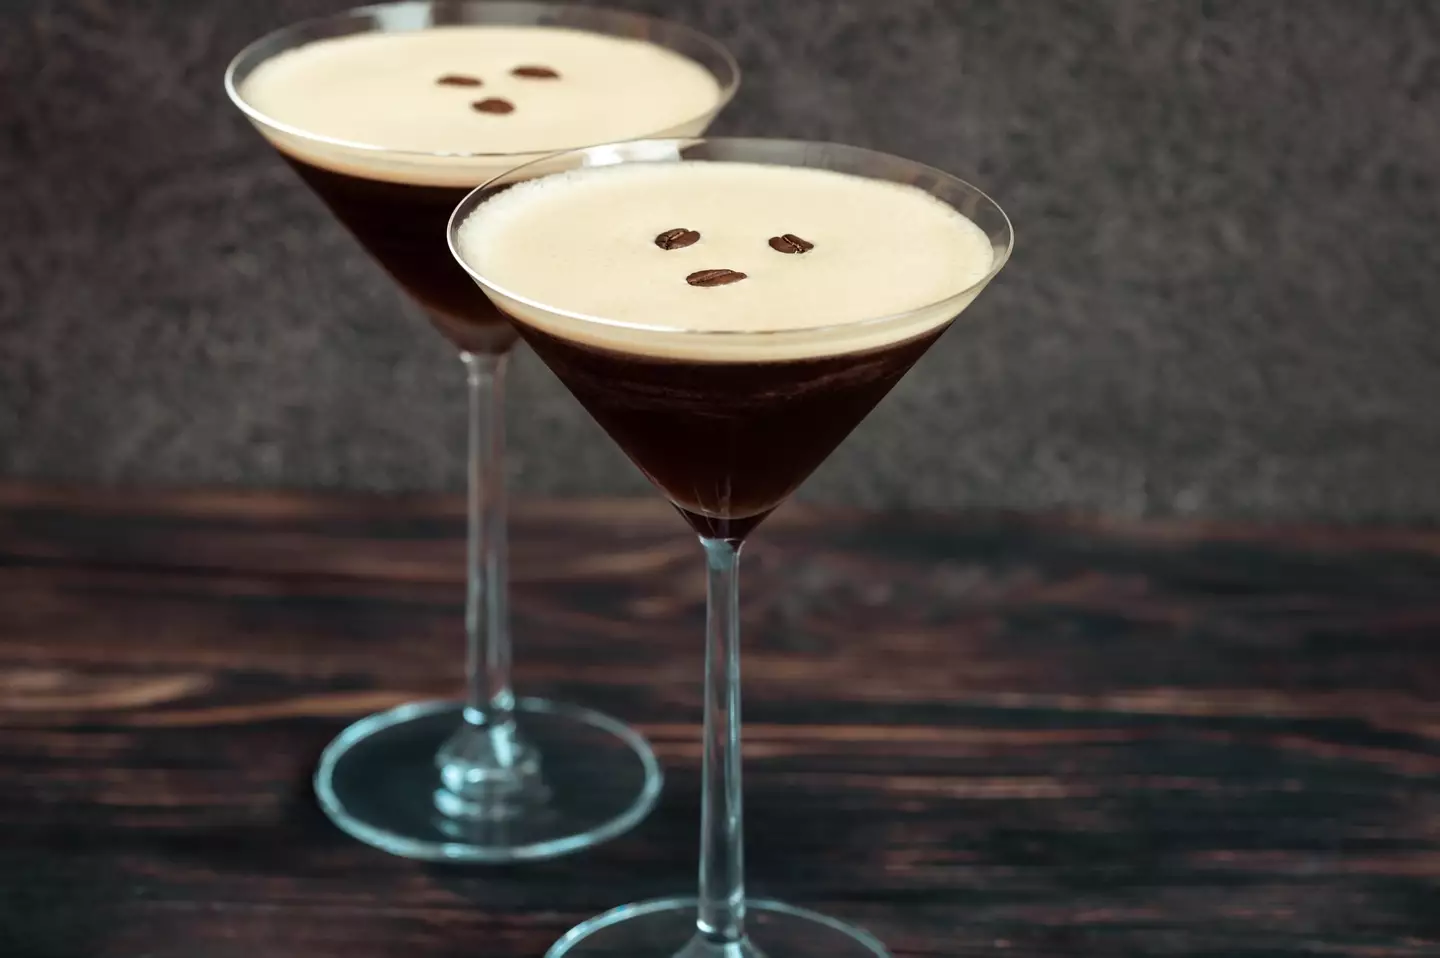 The expert recommends grating some parmesan over your espresso martini cocktail.